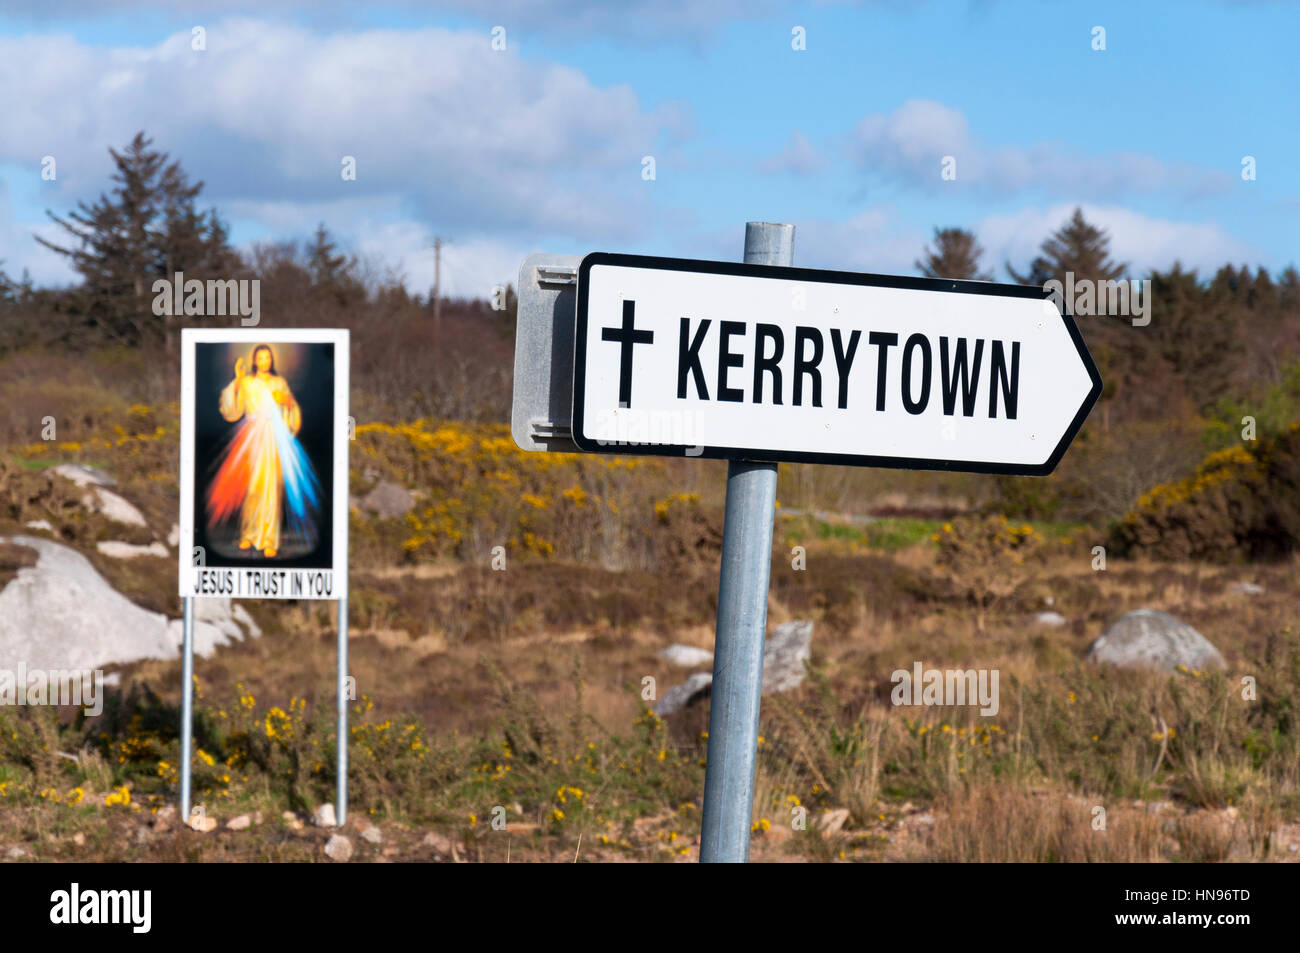 Jesus I Trust In You, signage near Kerrytown, County Donegal, Ireland Stock Photo